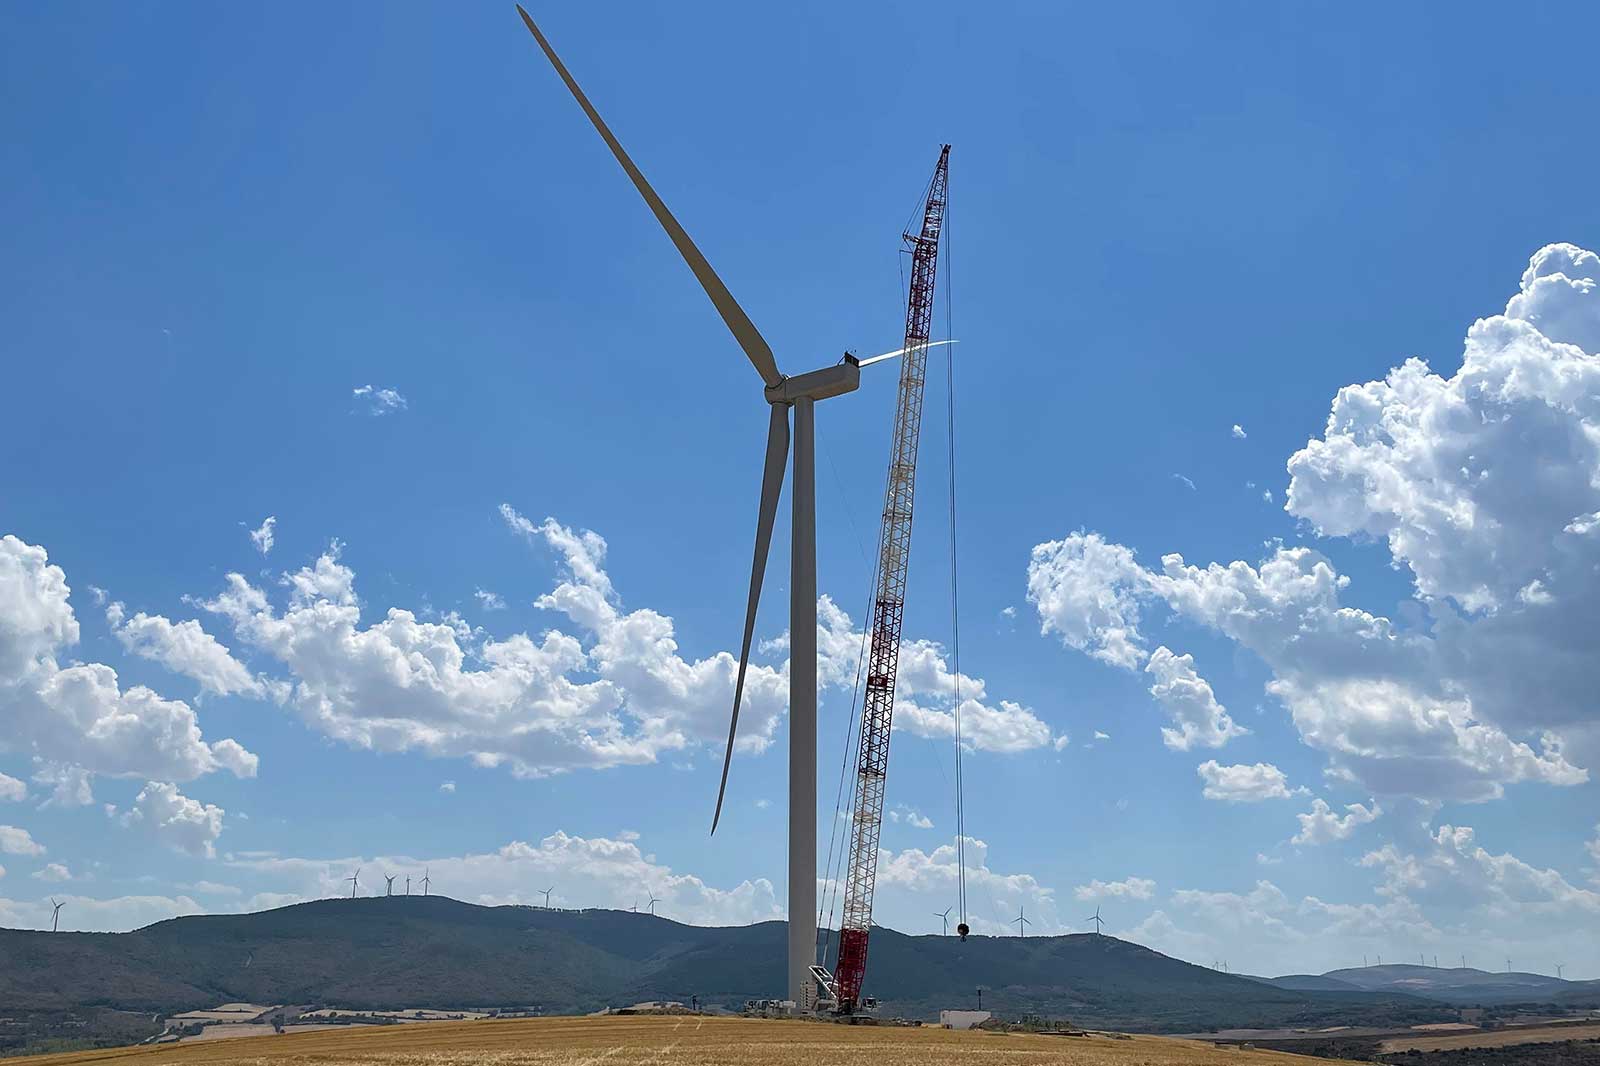 First turbine - Rea Unificado onshore wind farm | Projects under construction by RWE